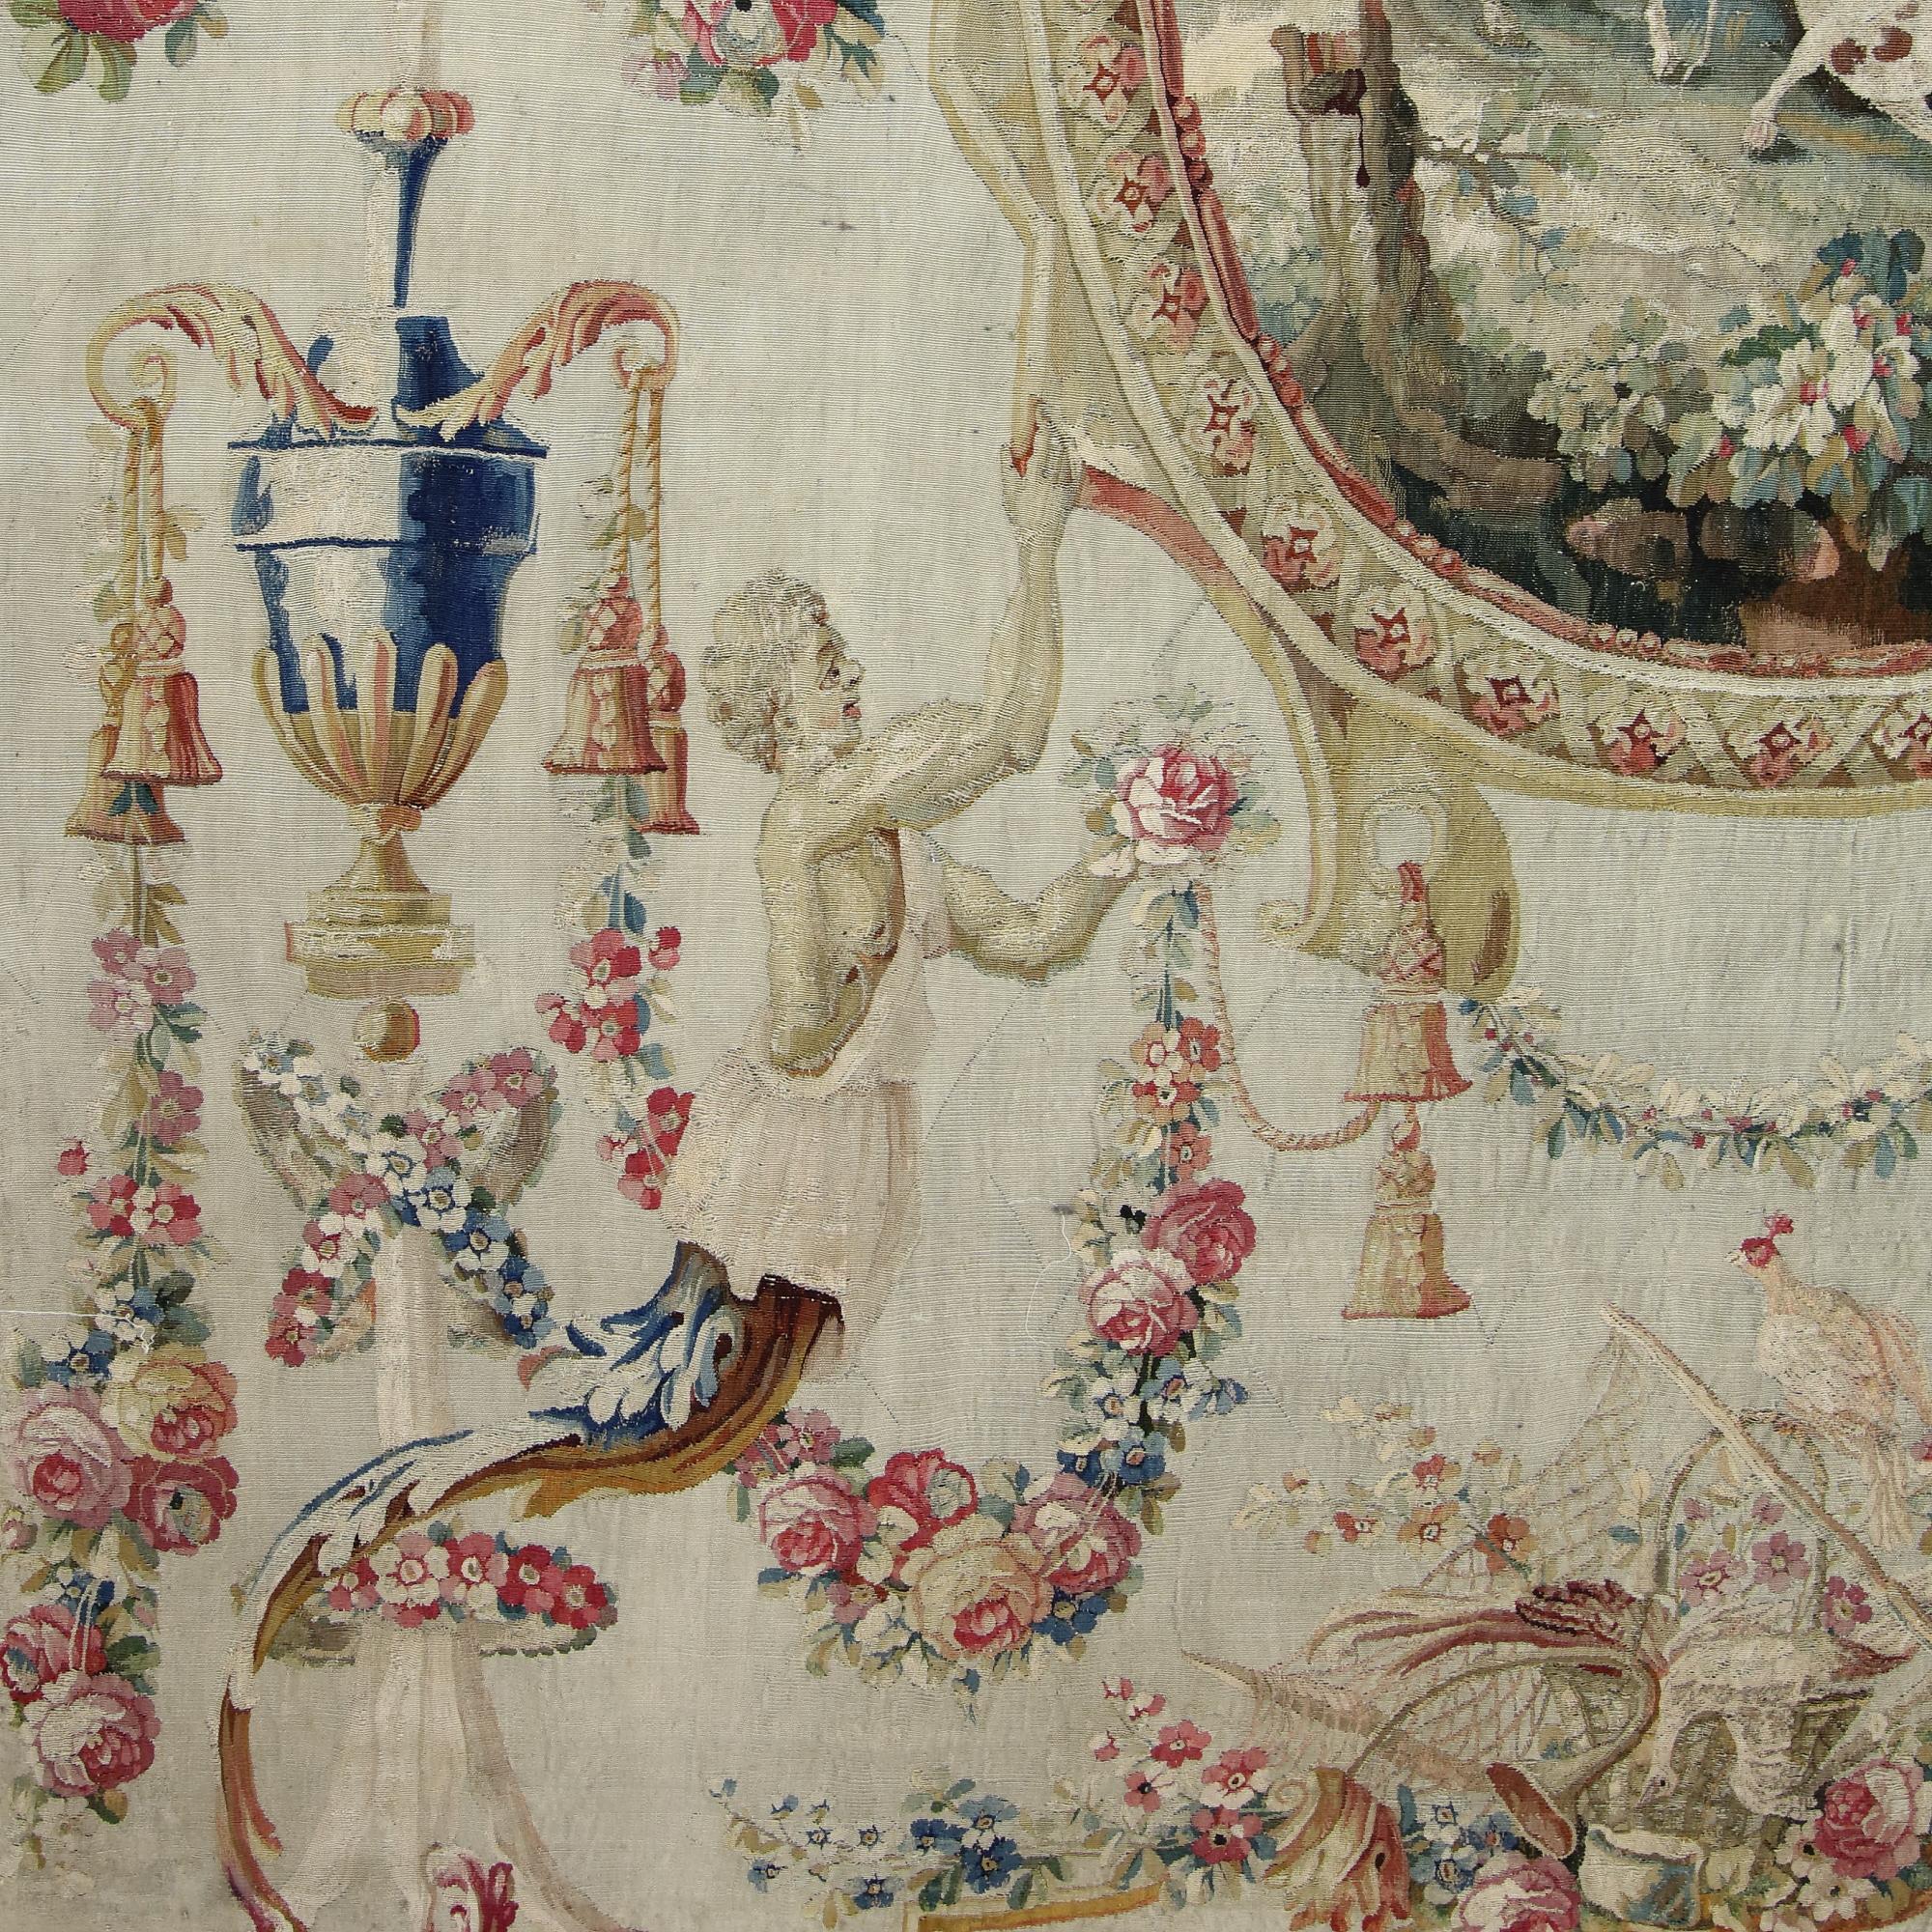 Hand-Woven 18th Century French Beauvais Louis XVI Neoclassical Hunting Tapestry After Oudry